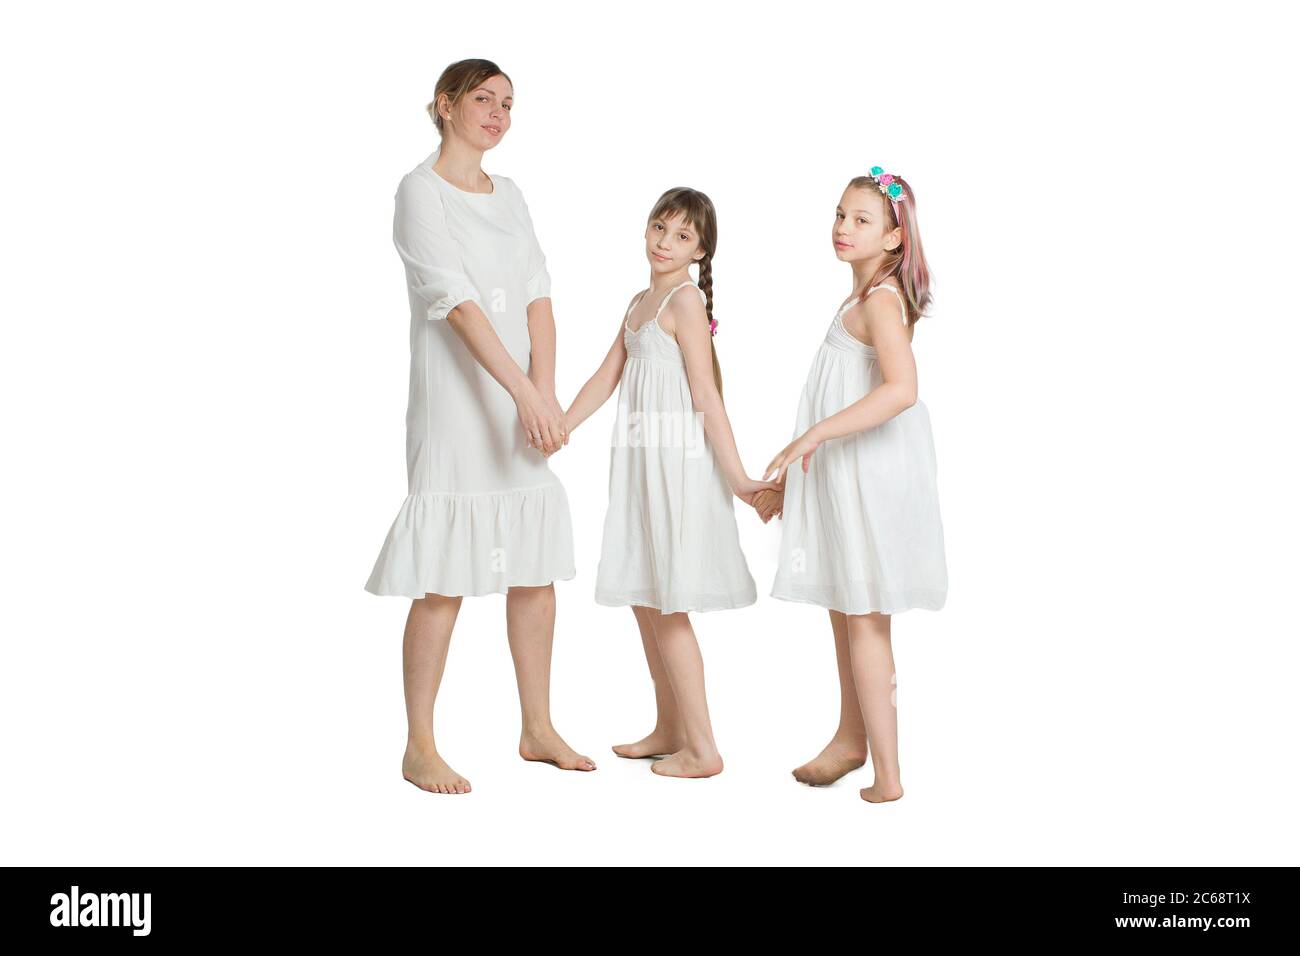 Family mother and two daughters in similar long white dresses. Isolated on white. Stock Photo